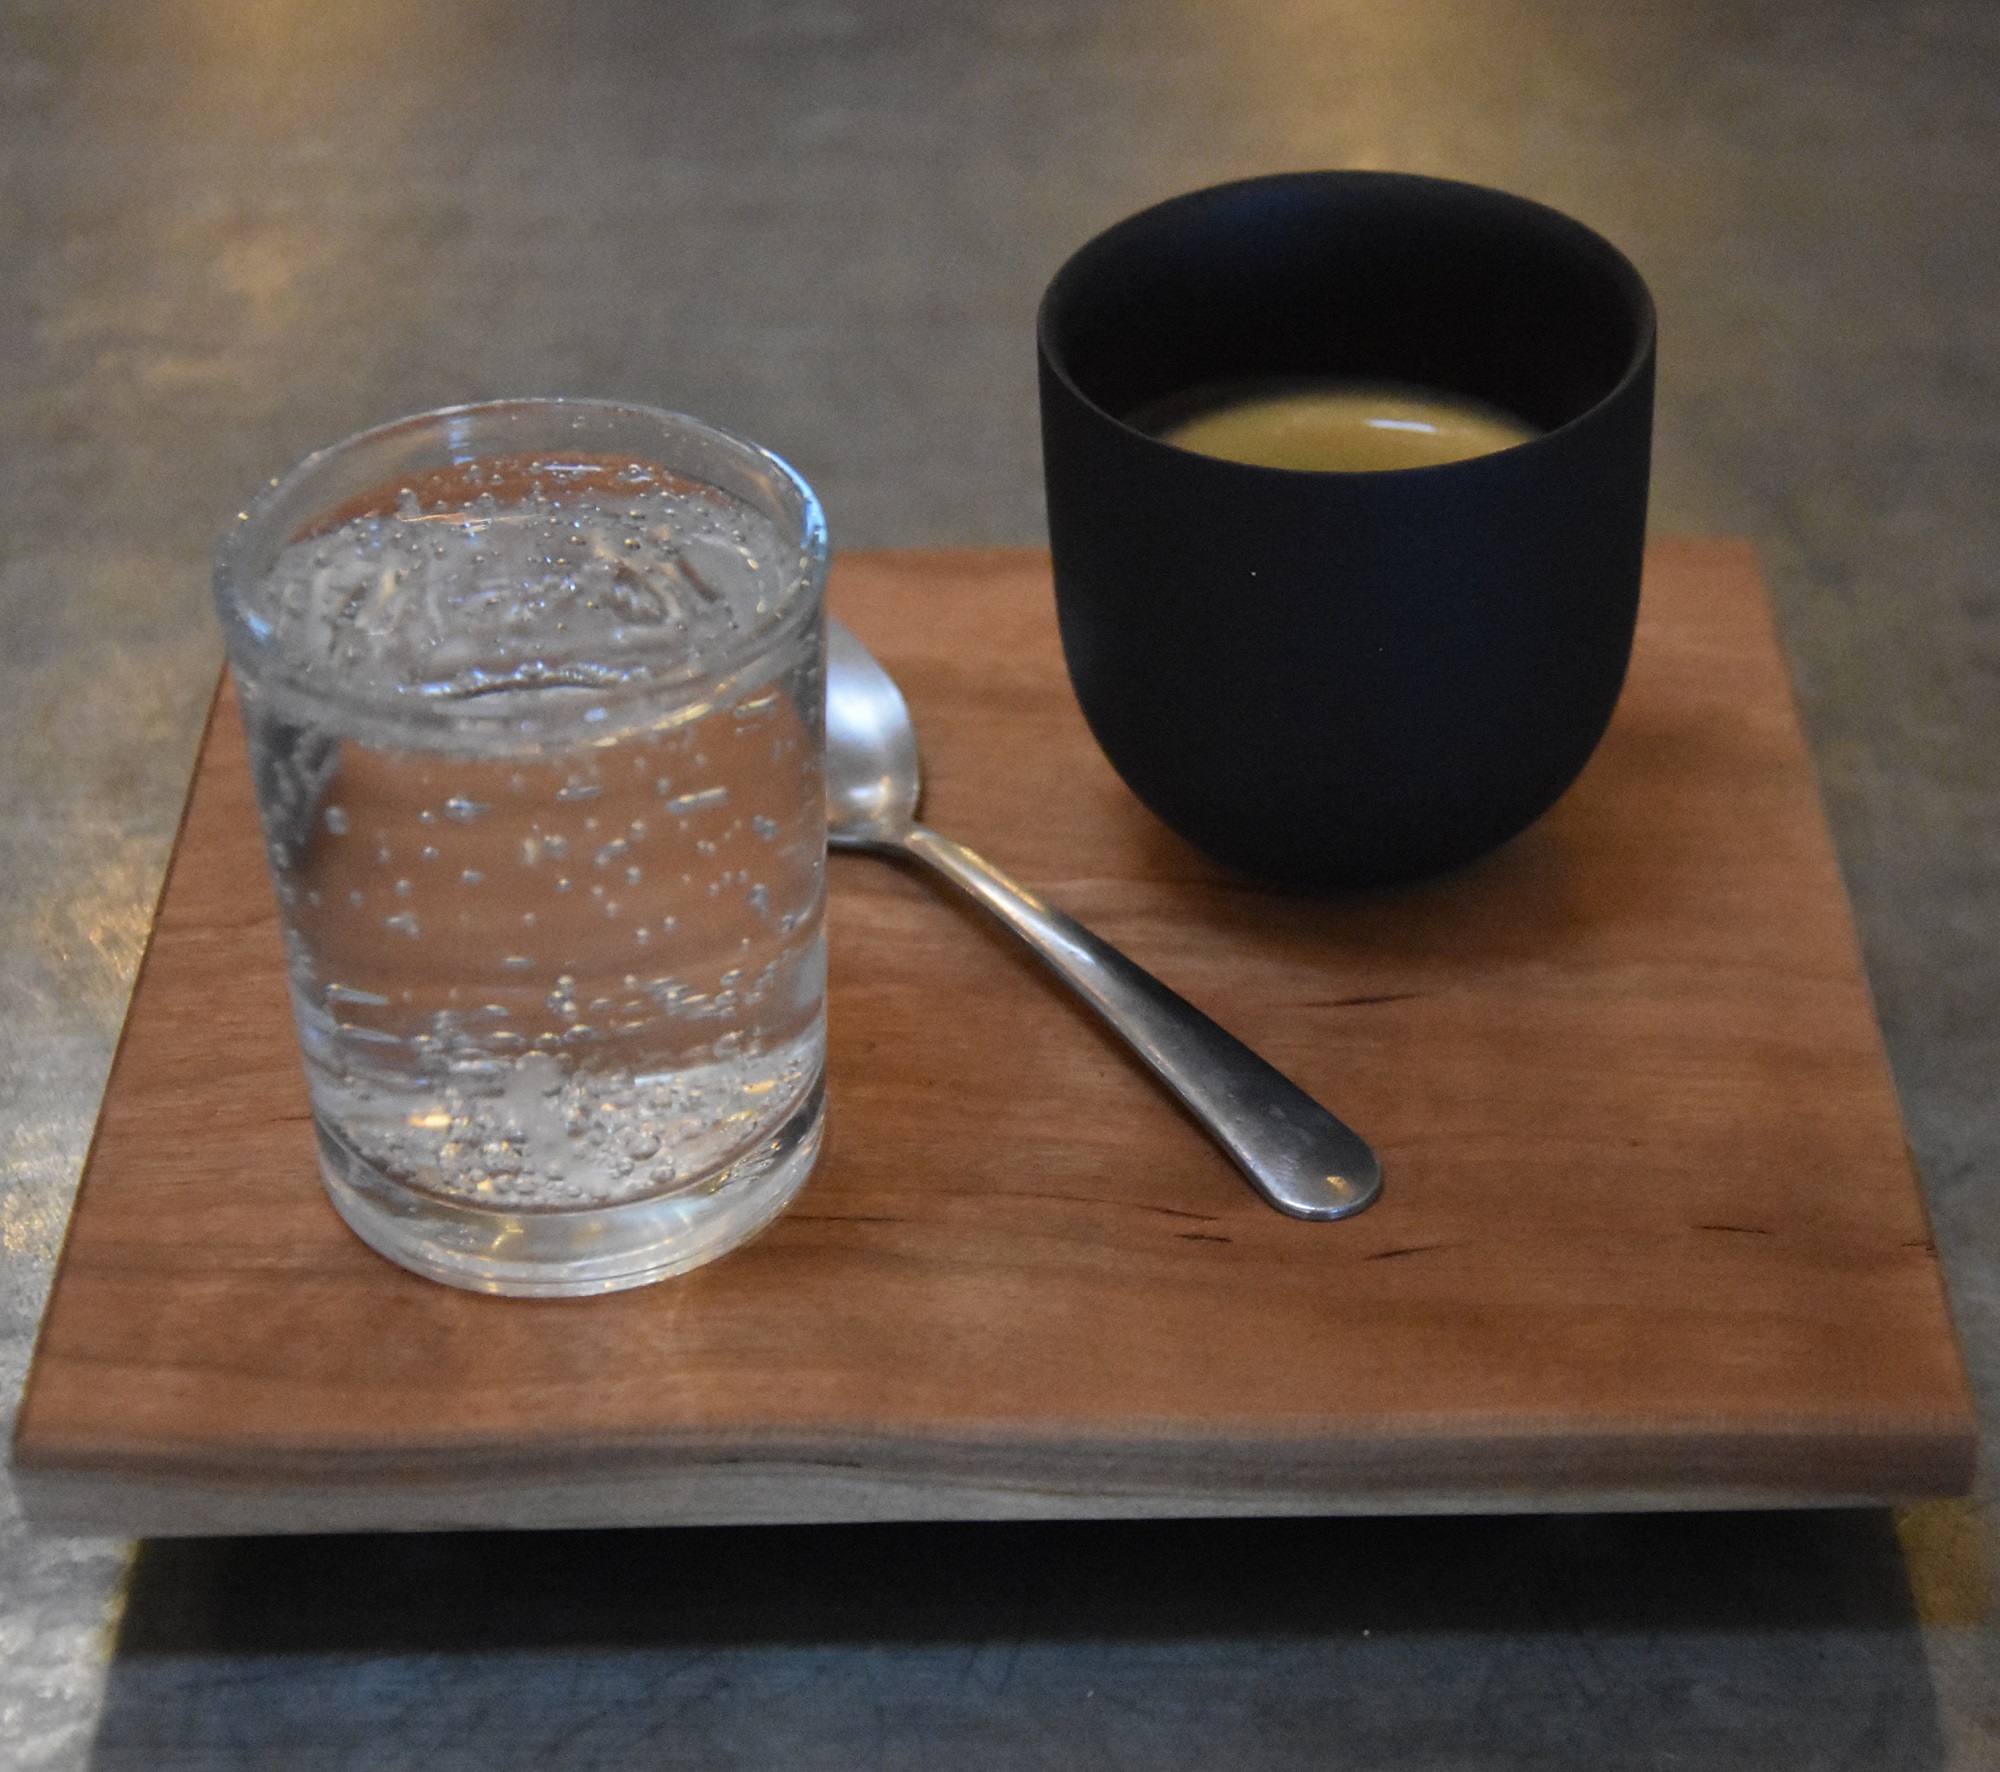 My espresso, a Colombian Geisha, roasted and served at Pair Speciality Coffee & Tea in Mesa, and presented on a square, wooden tray with a glass of water on the side.